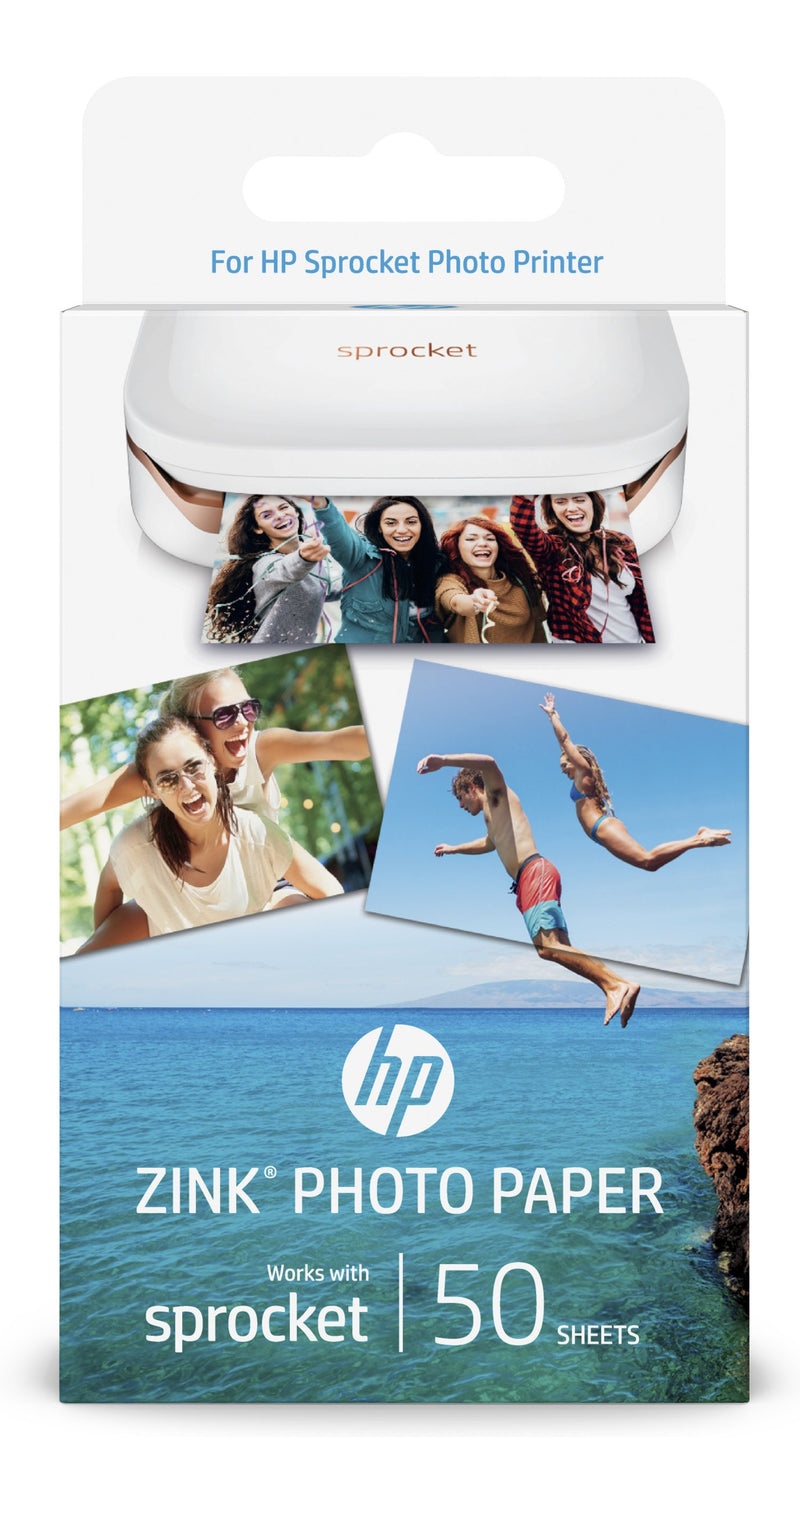 HP ZINK Sticky-Backed Photo Paper (50 Sheets)